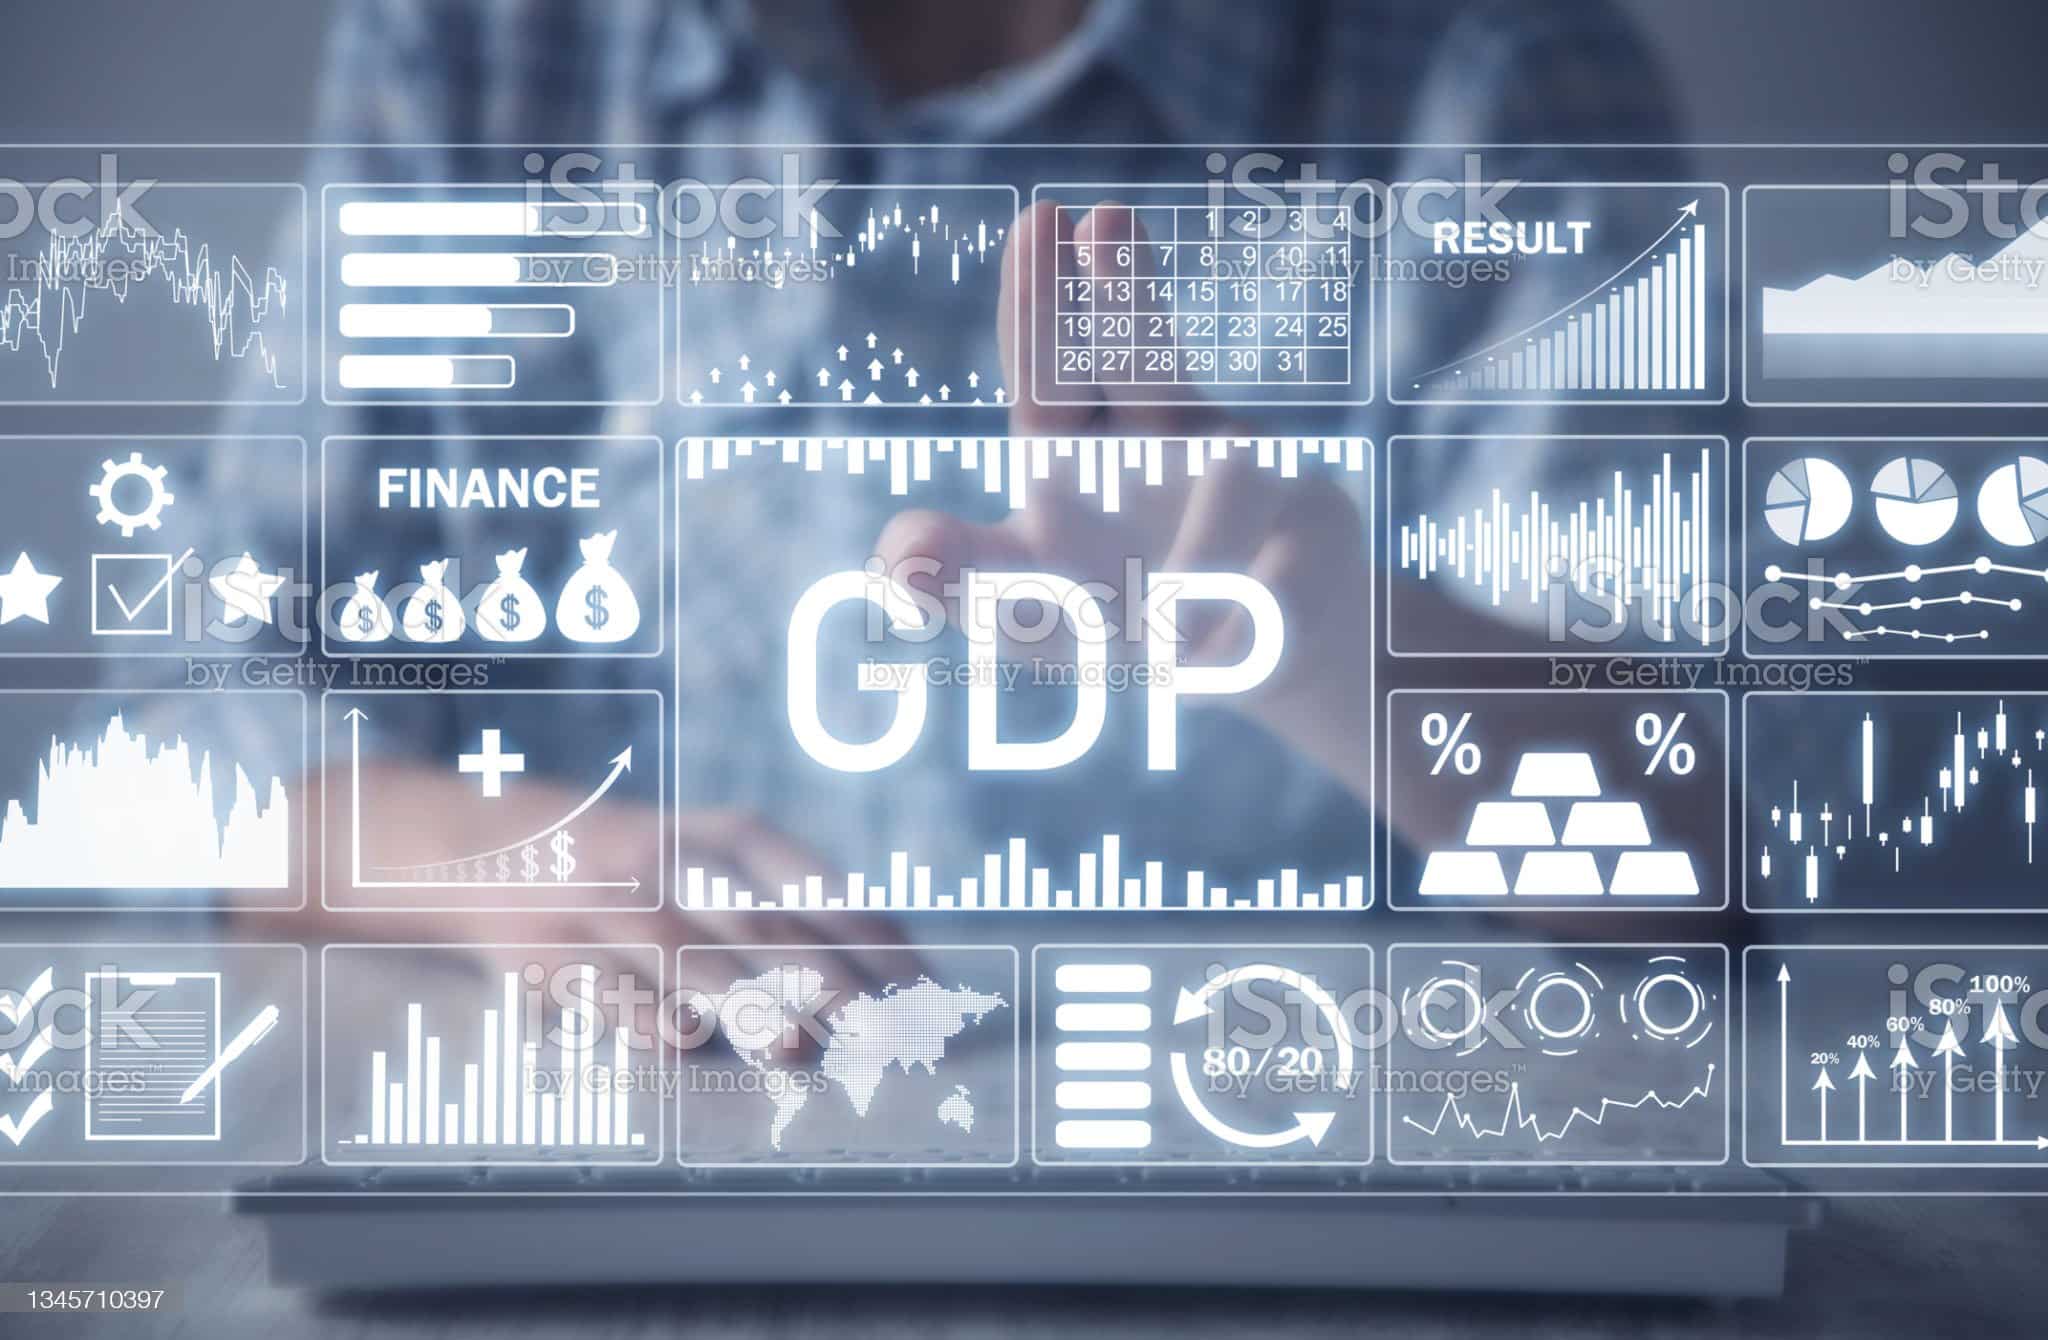 Q2 GDP: India's gross domestic product grows at 6.3% in July-Sept quarter of 2022-23 - check details here | Zee Business